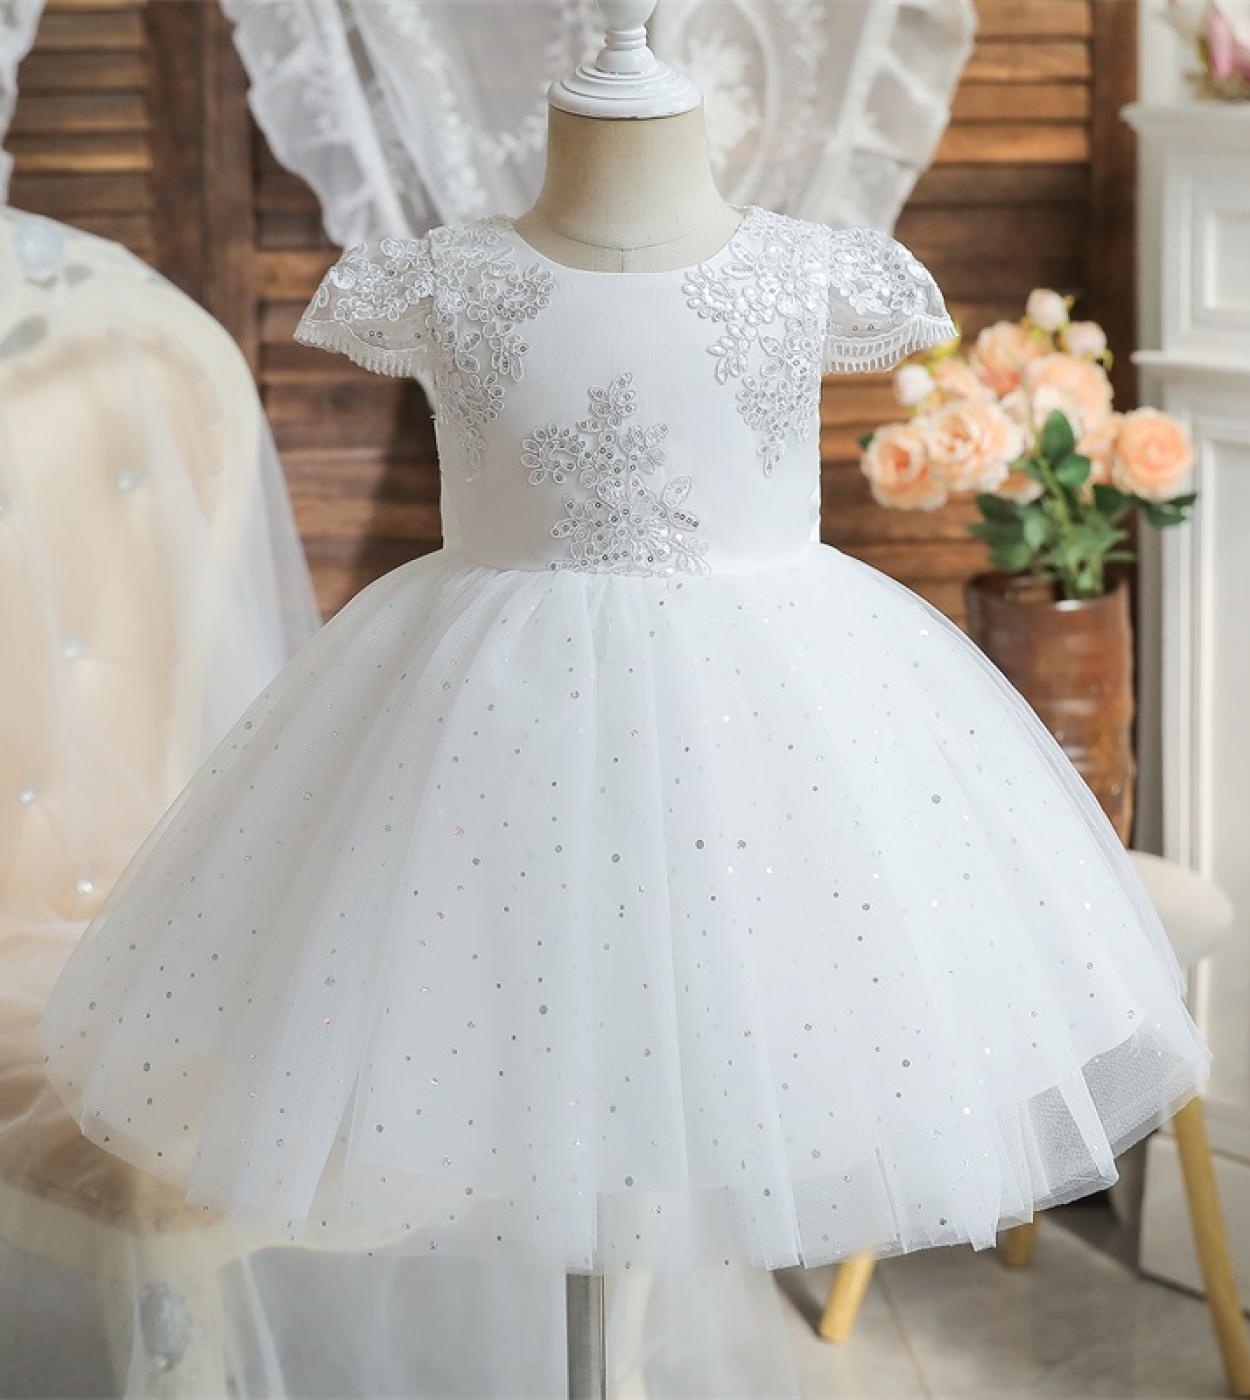 Girls Lace Christening Gown Flower Wedding Princess Party Dresses For 0 2 Year Elegant Baby Birthday Ceremony Costume Tu